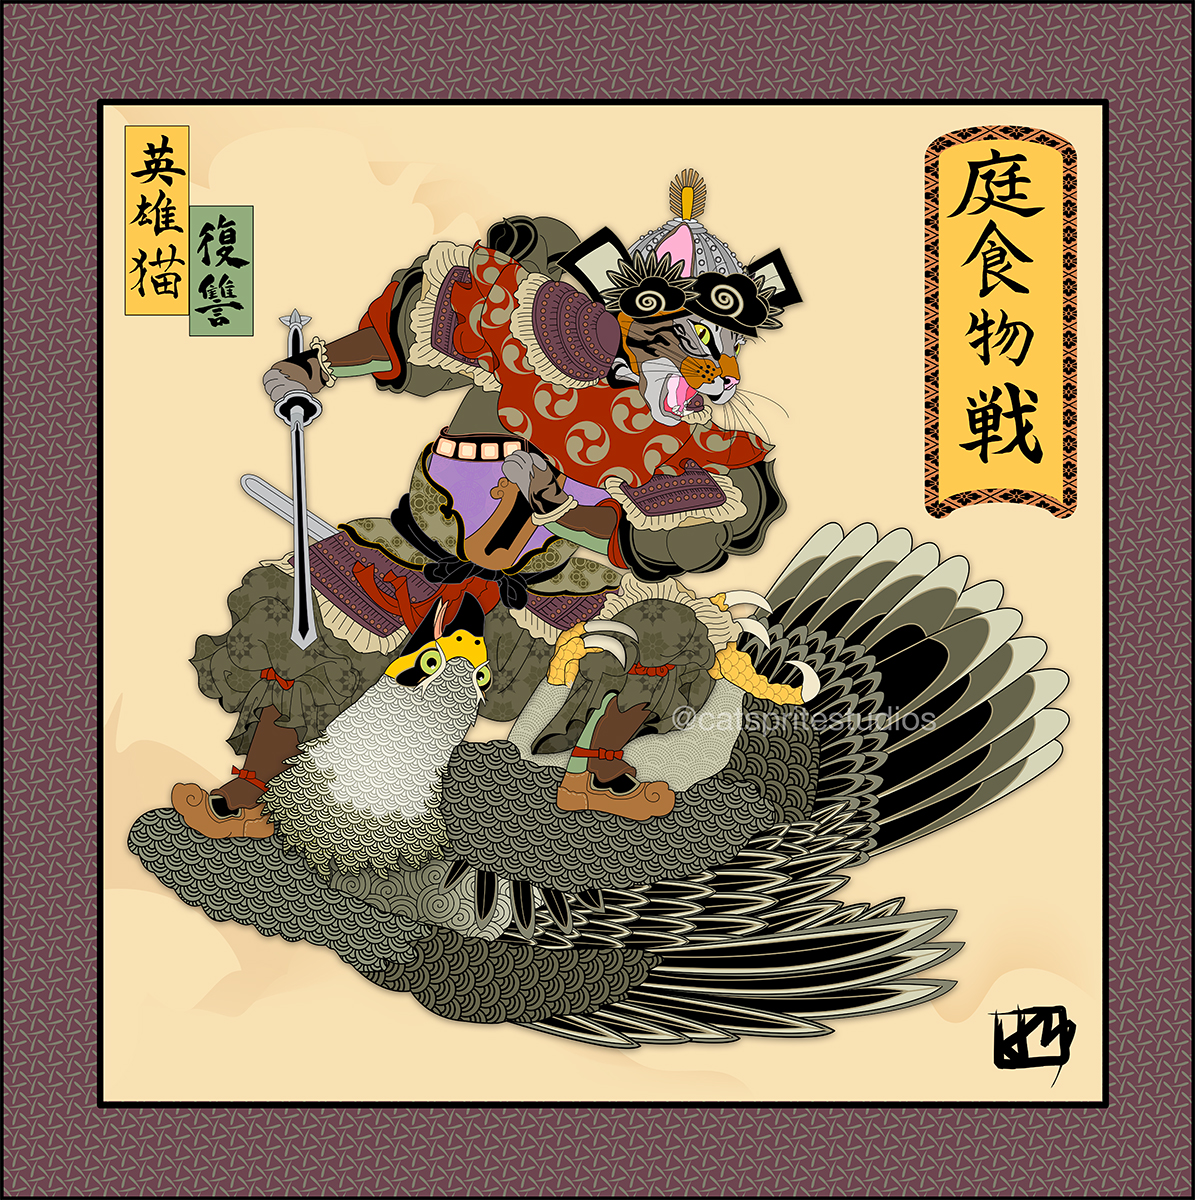 A samurai does battle with a falcon intent on carrying him off. The text reads 'hero cat', 'hungry falcon' and 'backyard